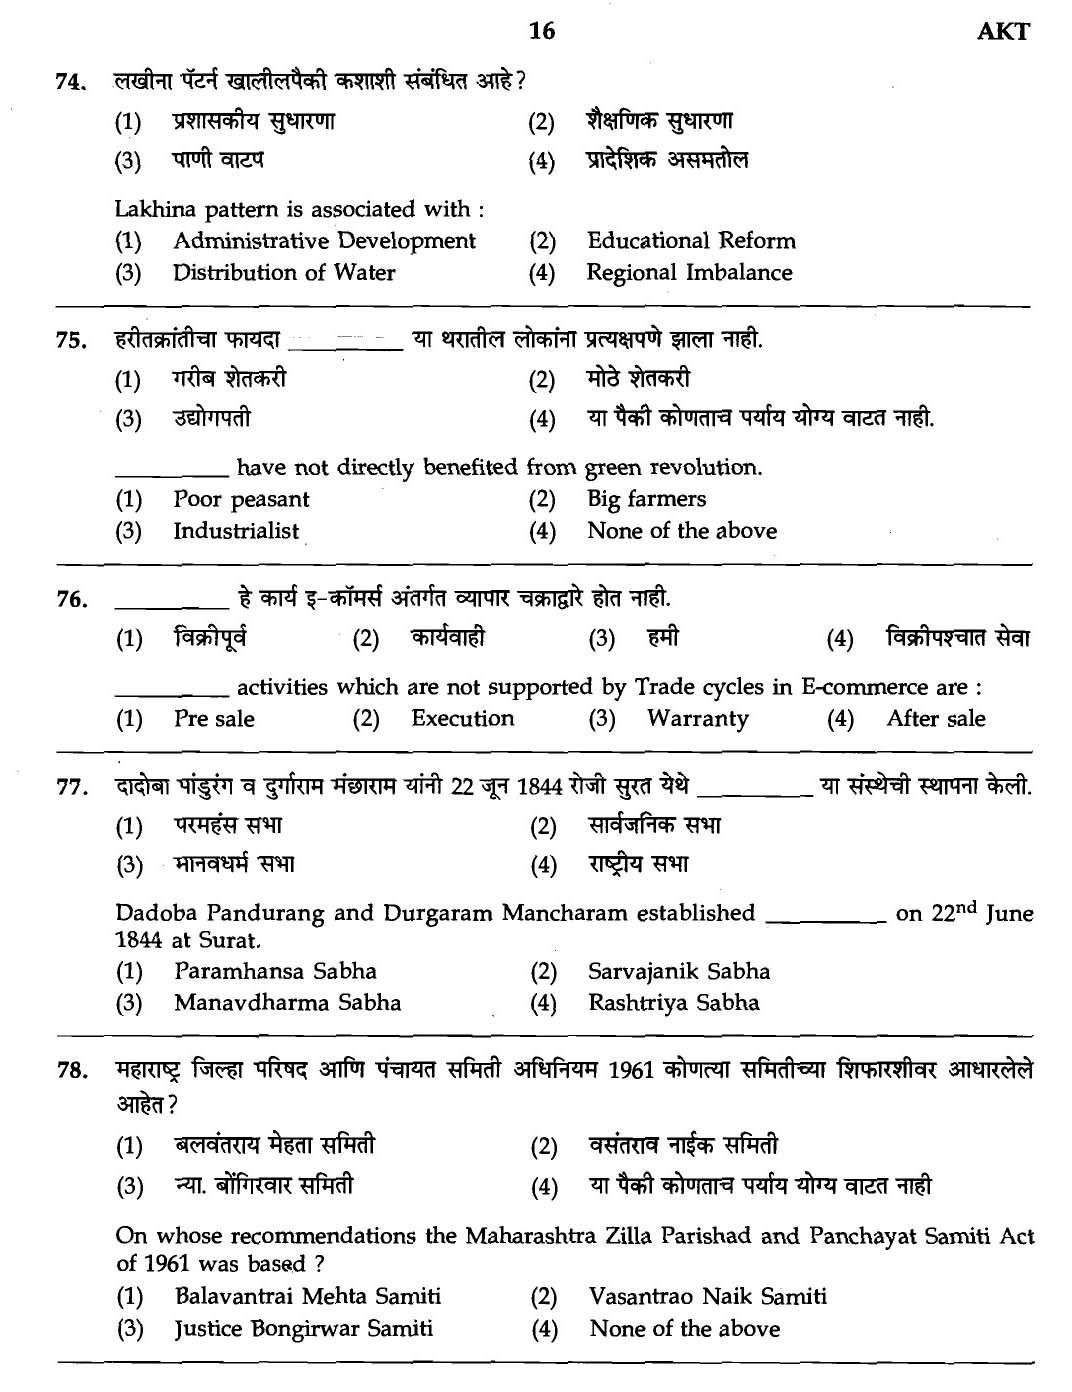 MPSC Agricultural Services Exam 2007 General Question Paper 14